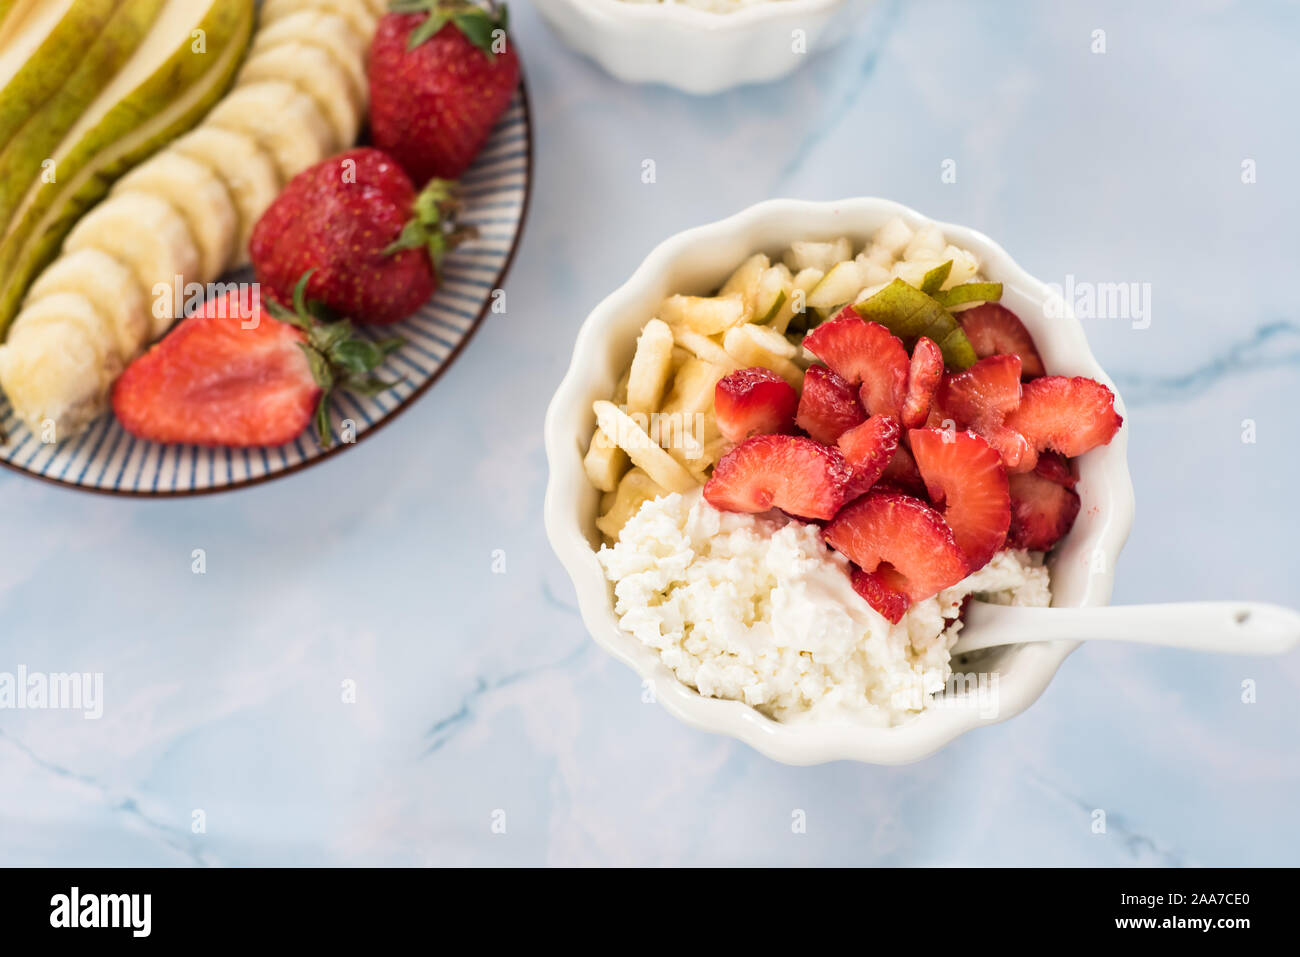 Fresh Cottage Cheese And Berries For Healthy Eating Stock Photo